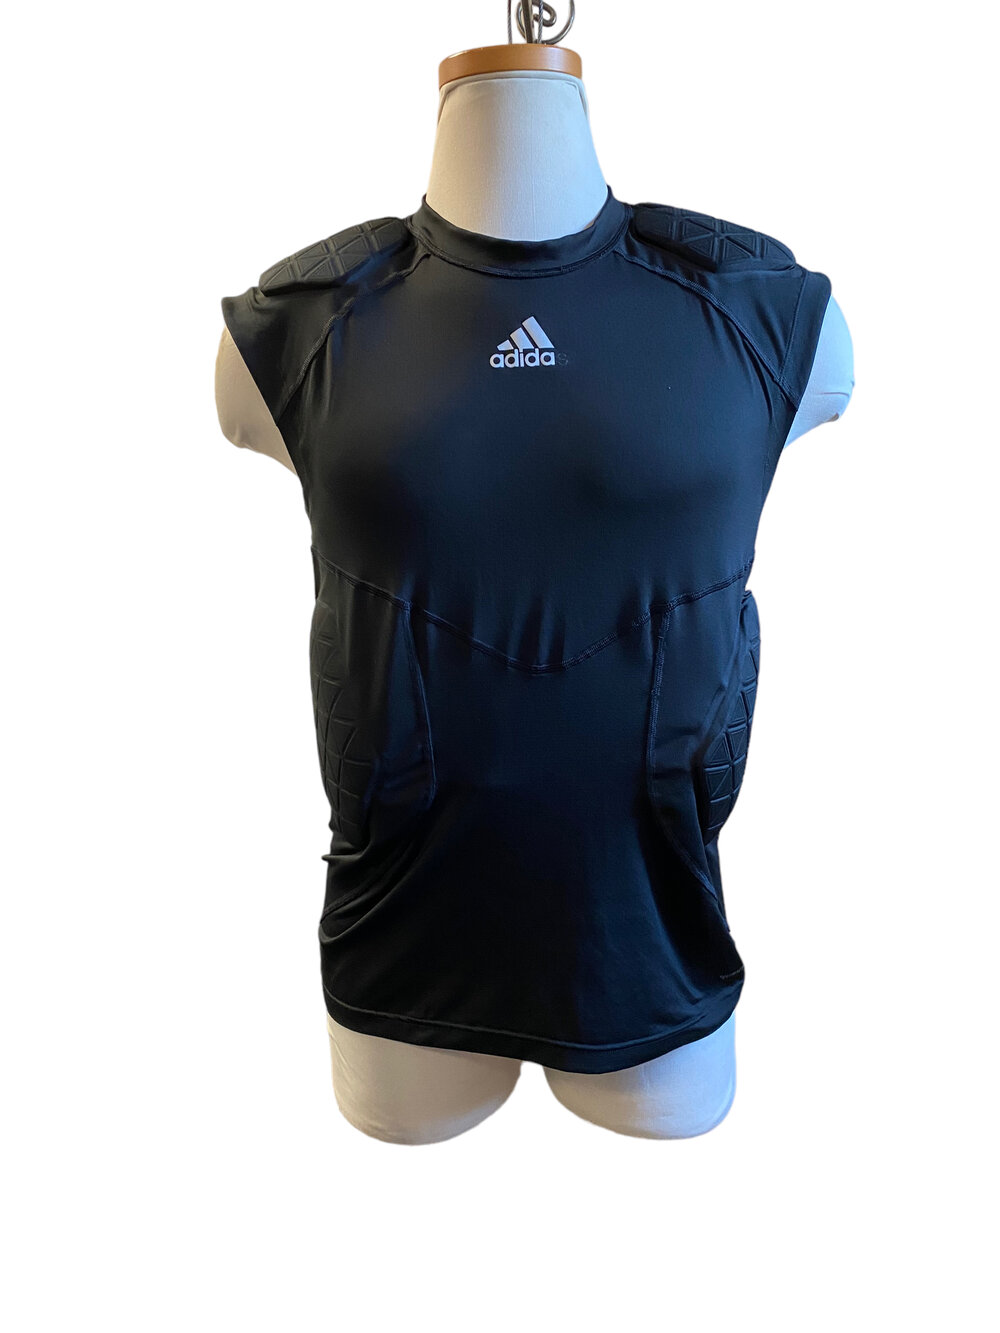  Men's Padded Compression Shirt Protective Short Sleeve